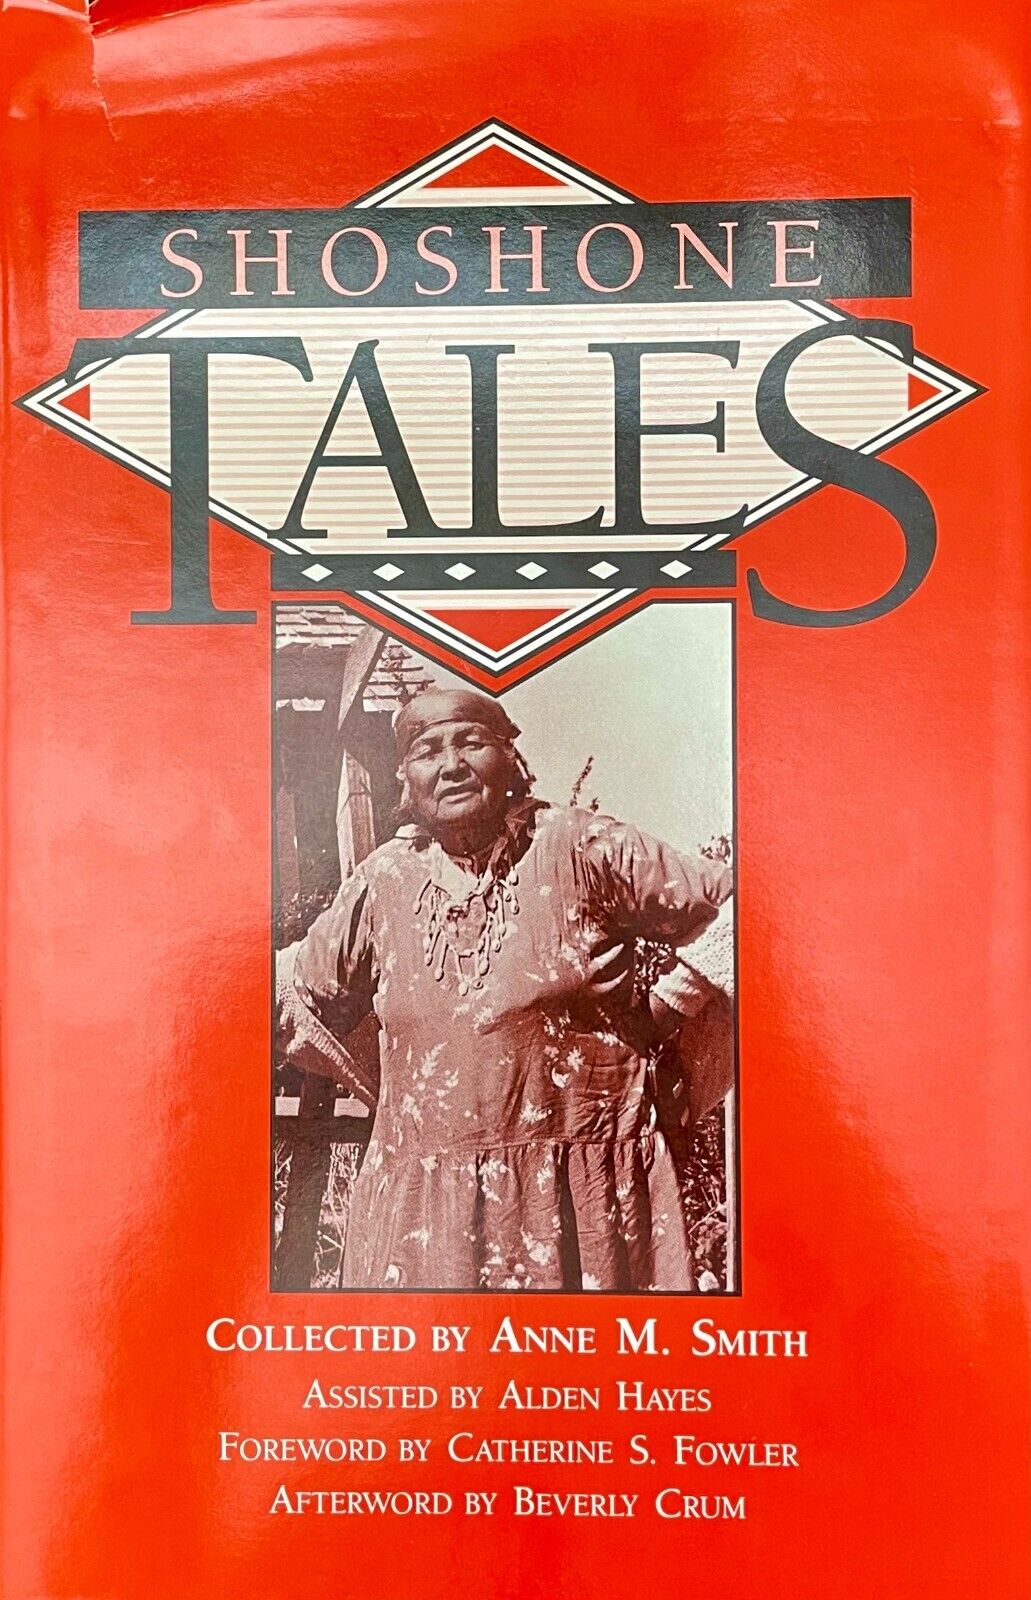 SHOSHONE TALES-1993-NEW CONDITION-NATIVE AMERICAN VINTAGE BOOK WITH DUST JACKET